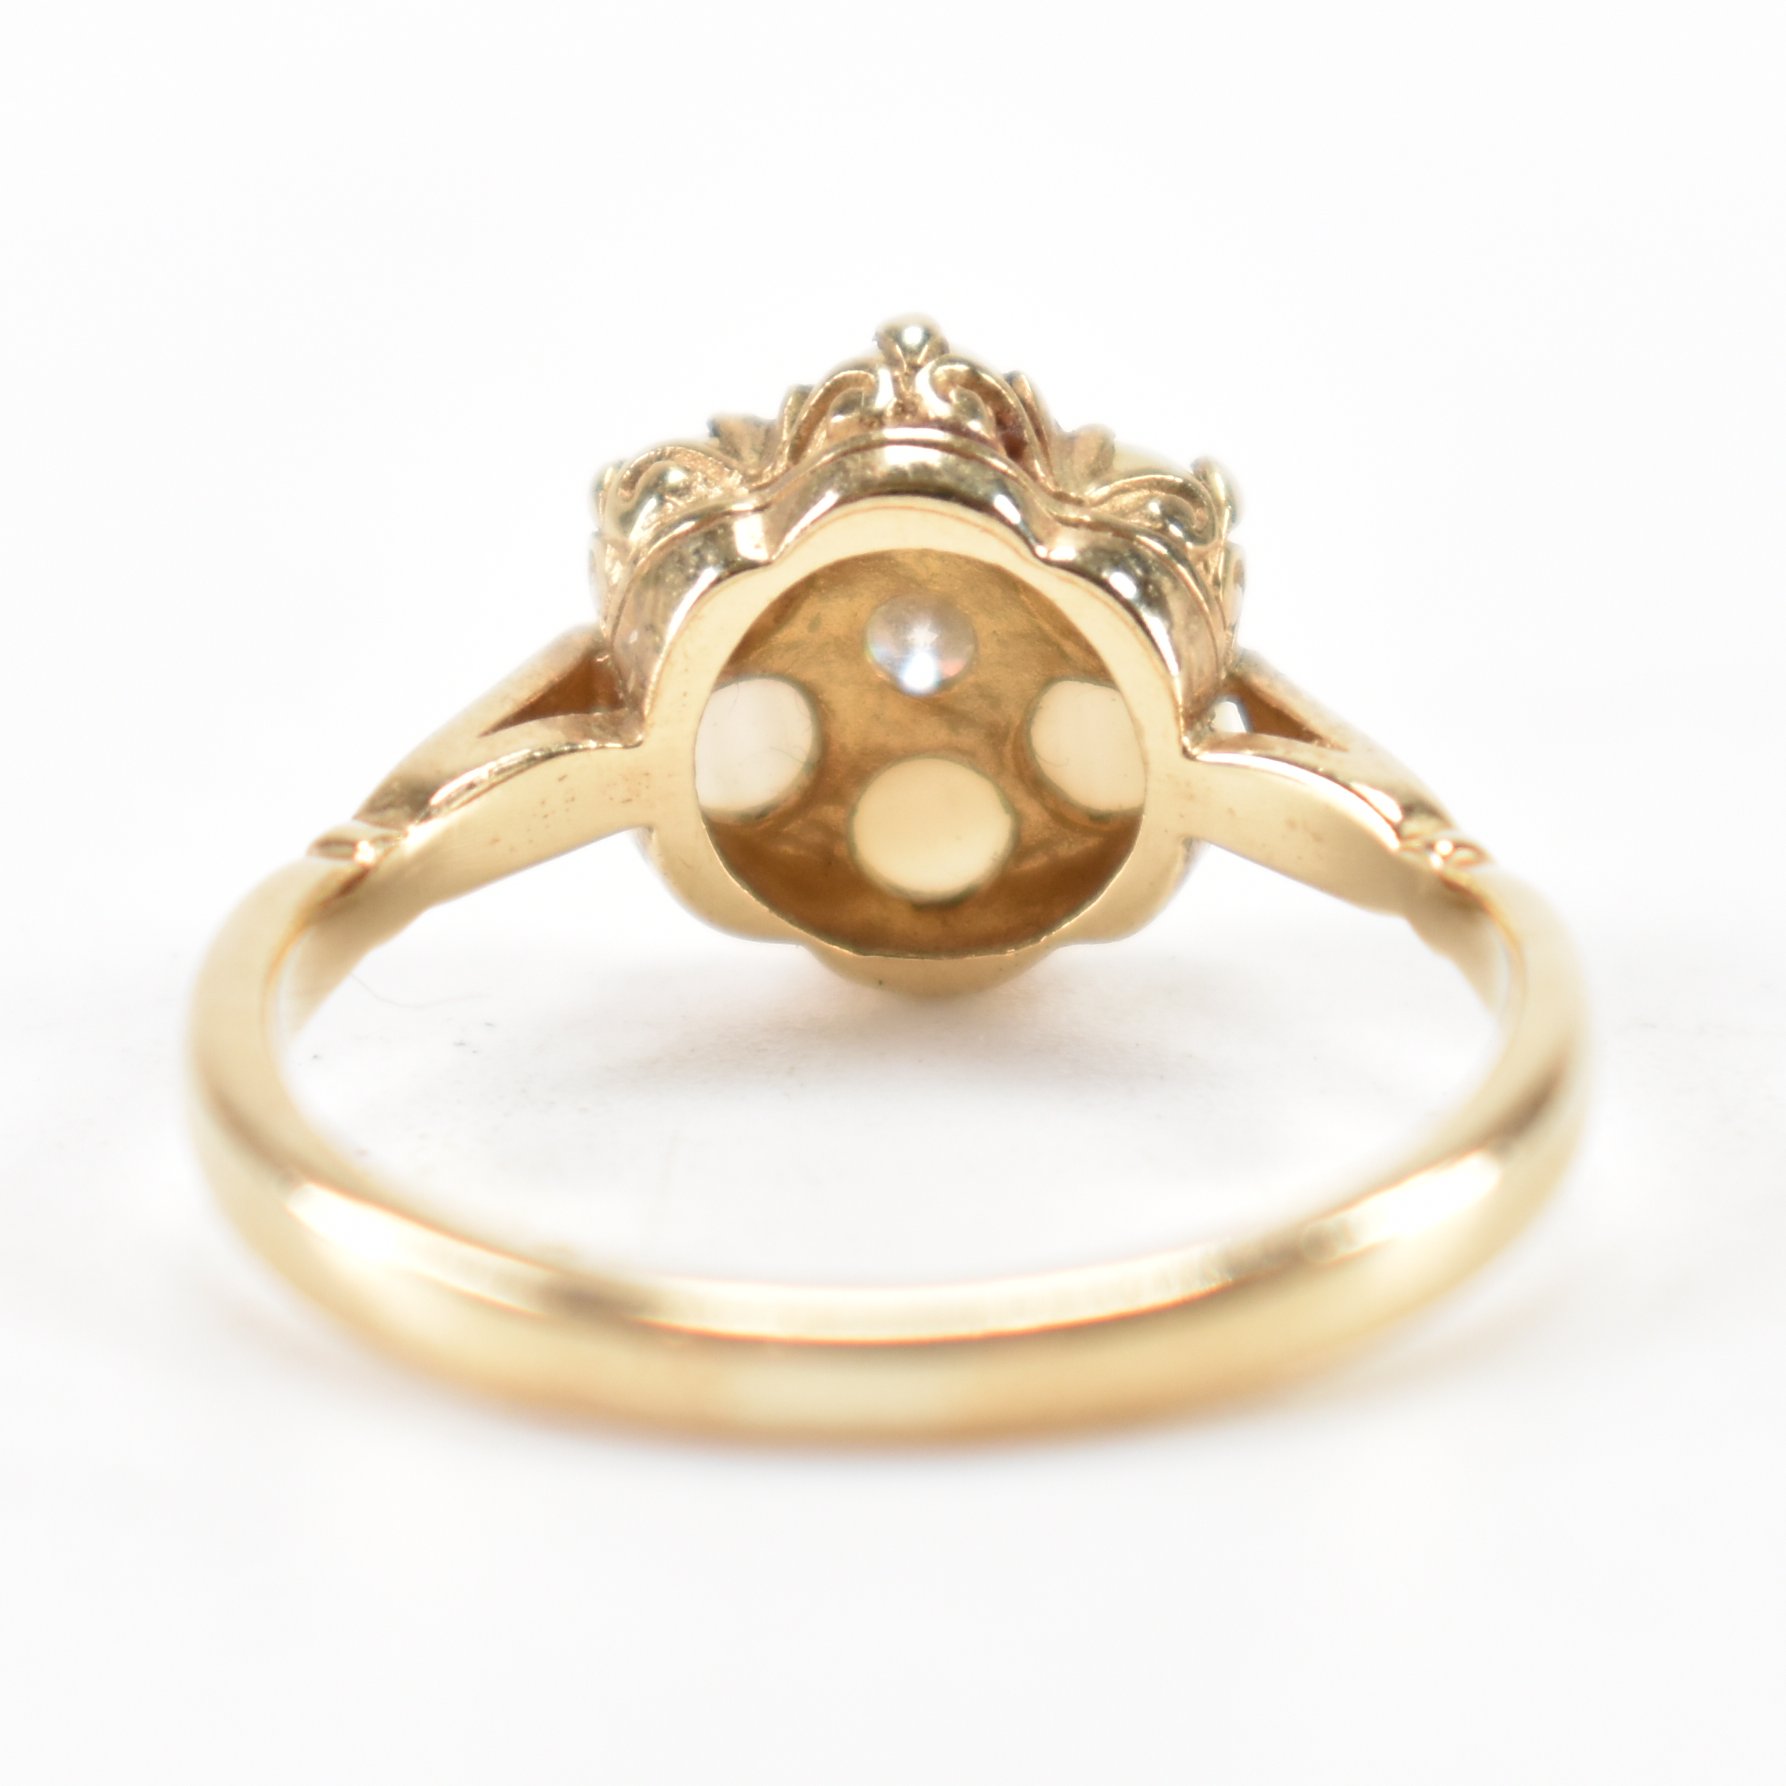 HALLMRKED 9CT GOLD CULTURED PEARL & DIAMOND RING - Image 3 of 8